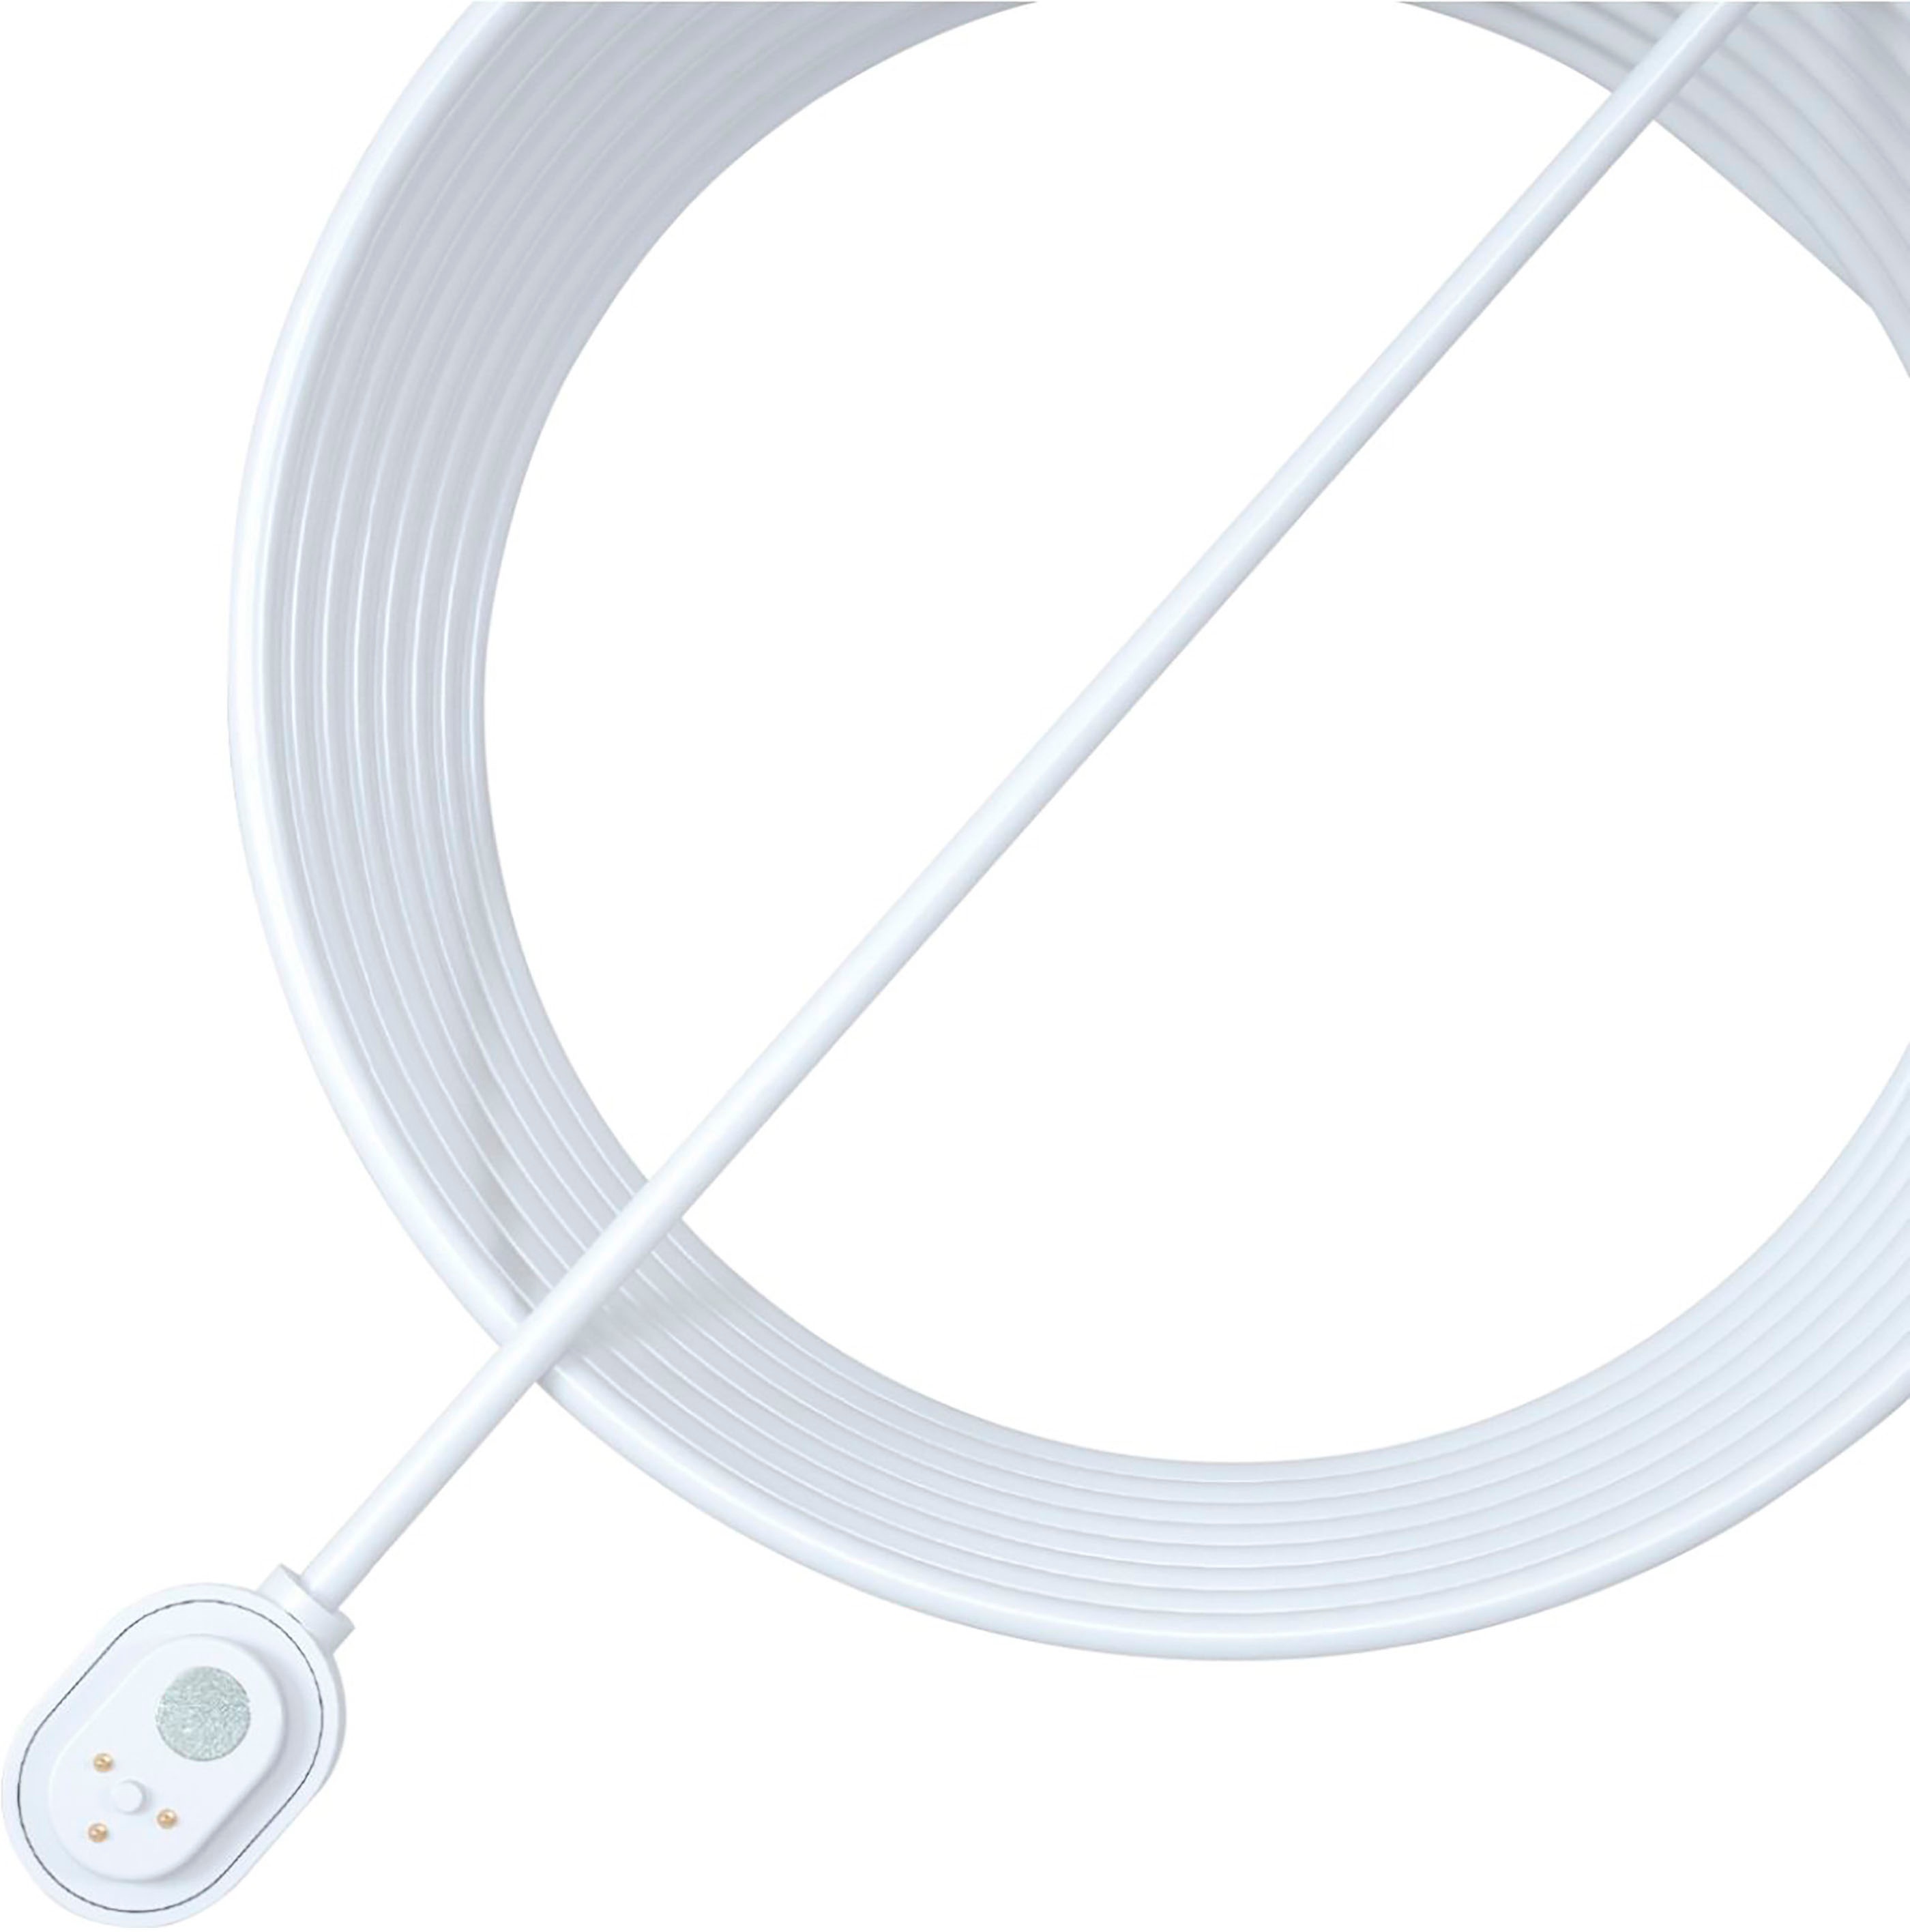 Arlo VMA5600C Outdoor Magnetic Charging Cable for sale online 